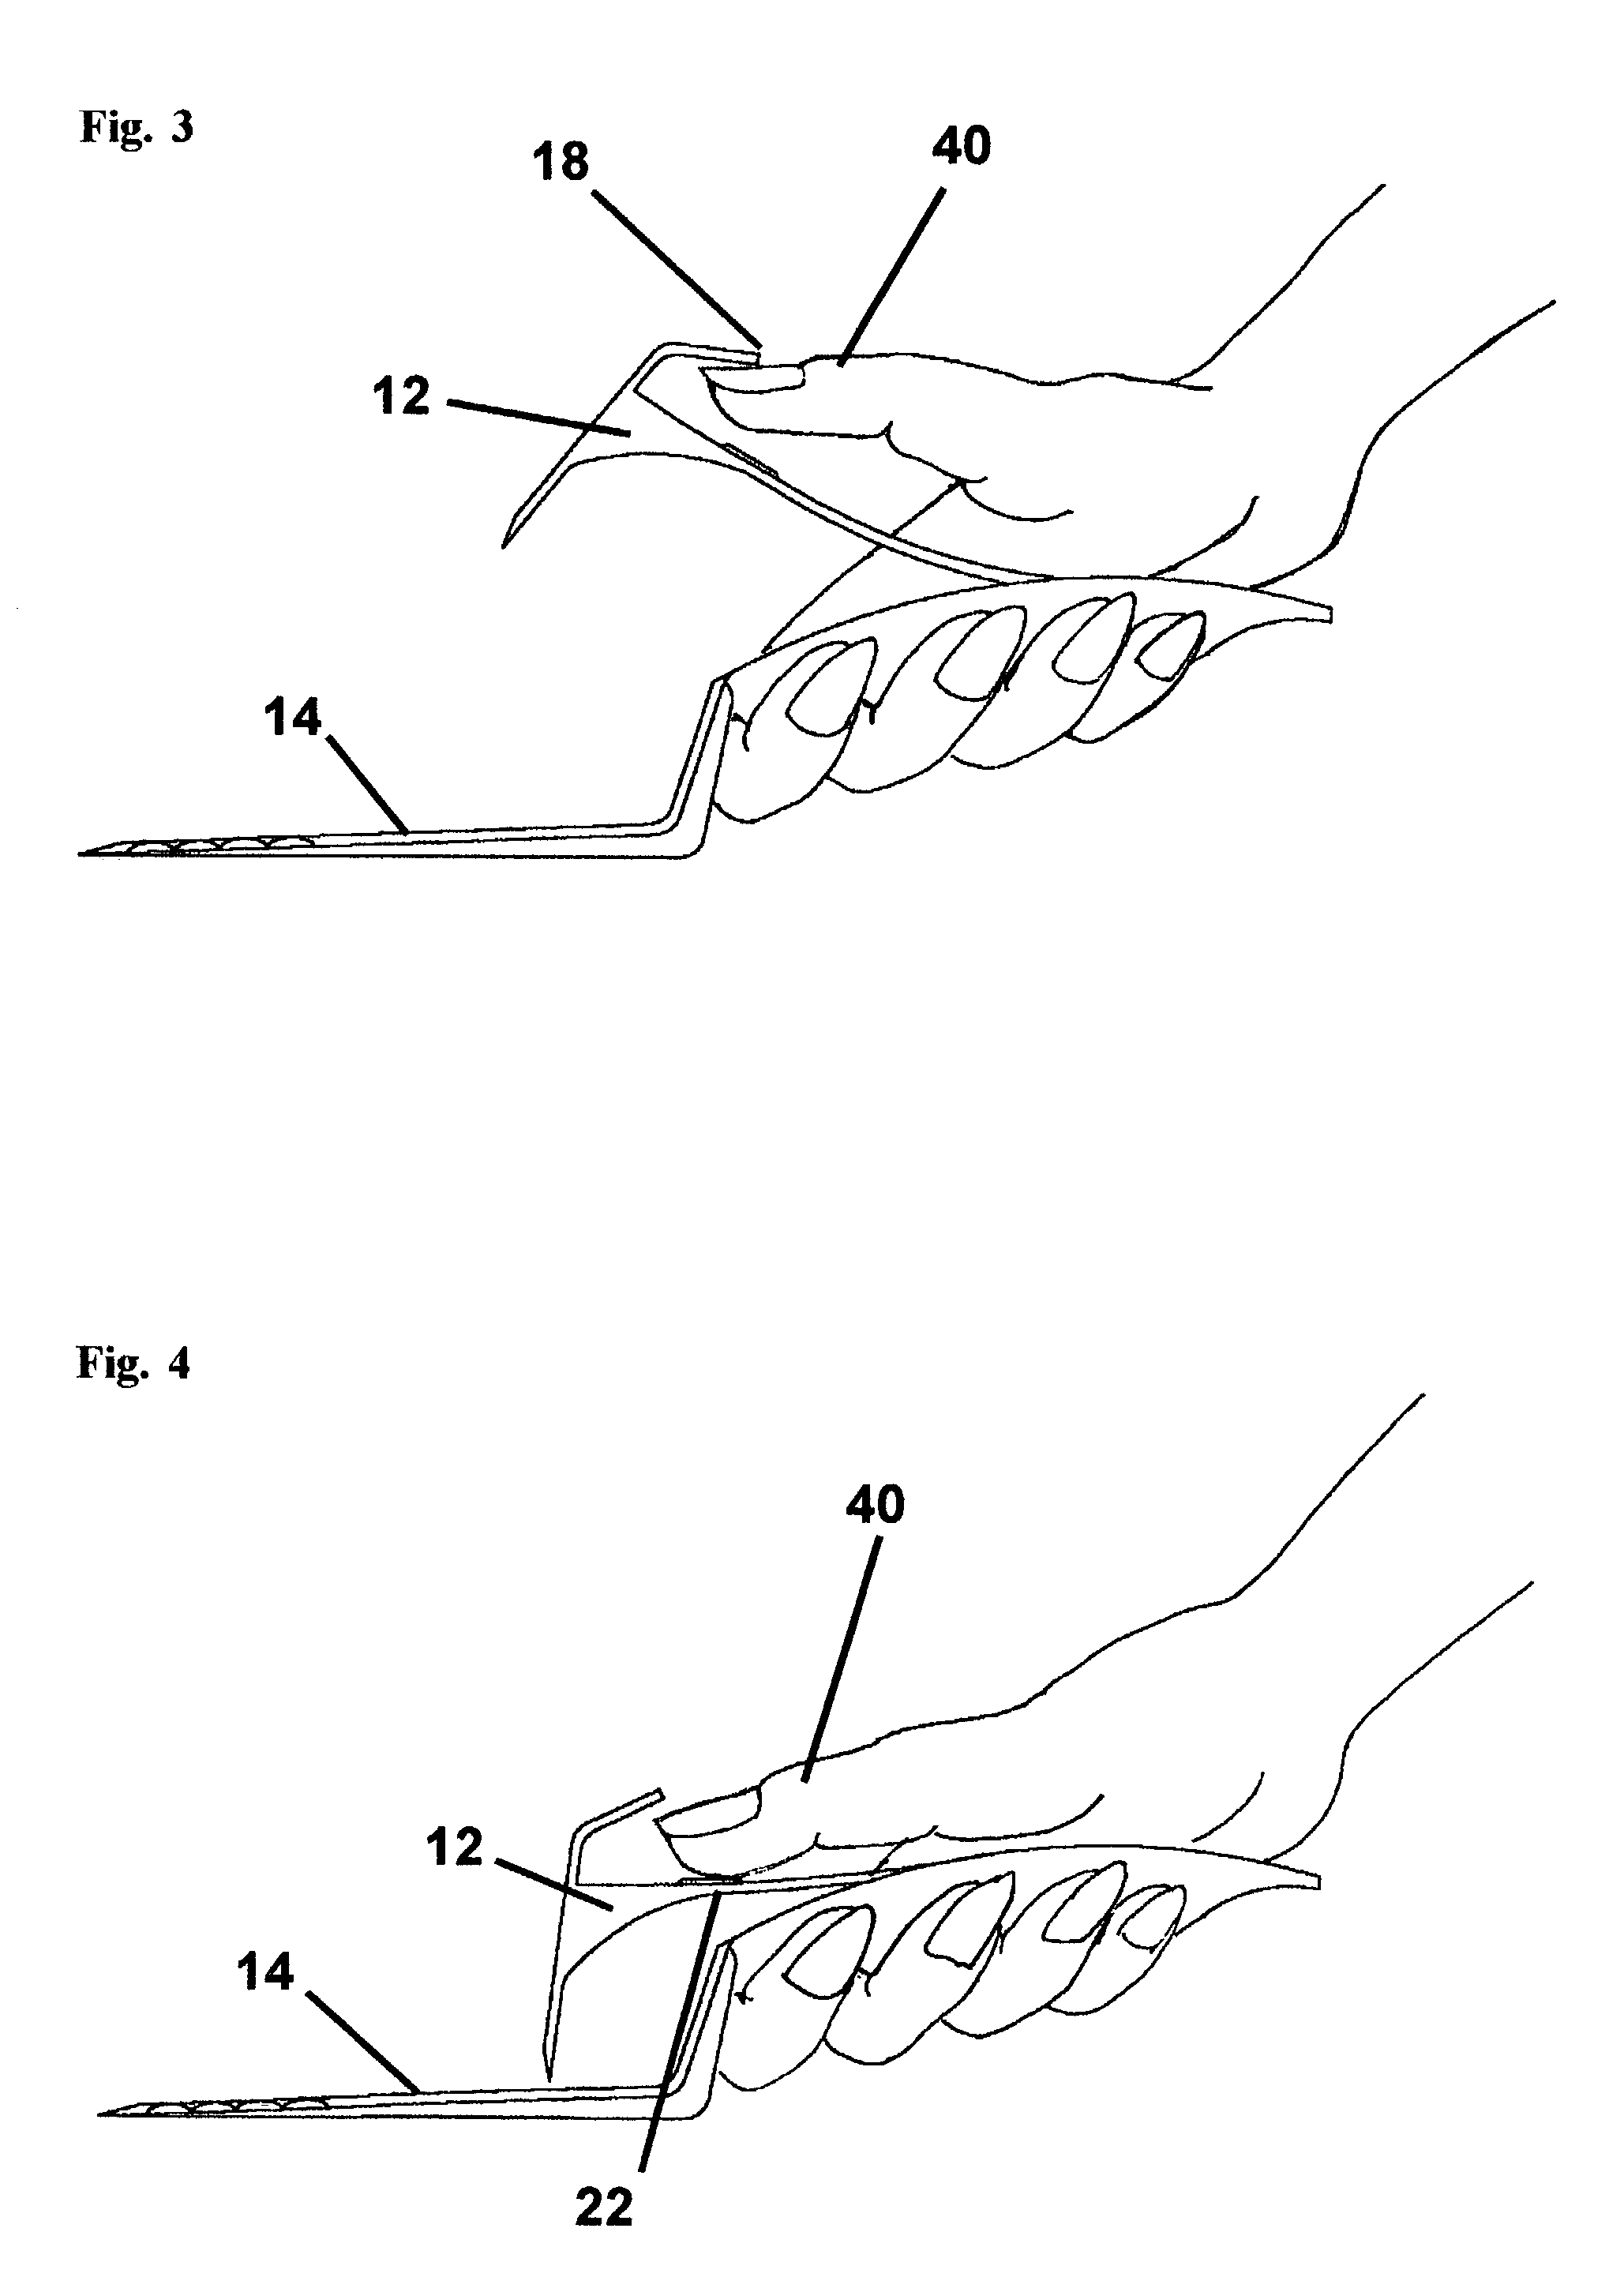 Food serving device with integral clamp